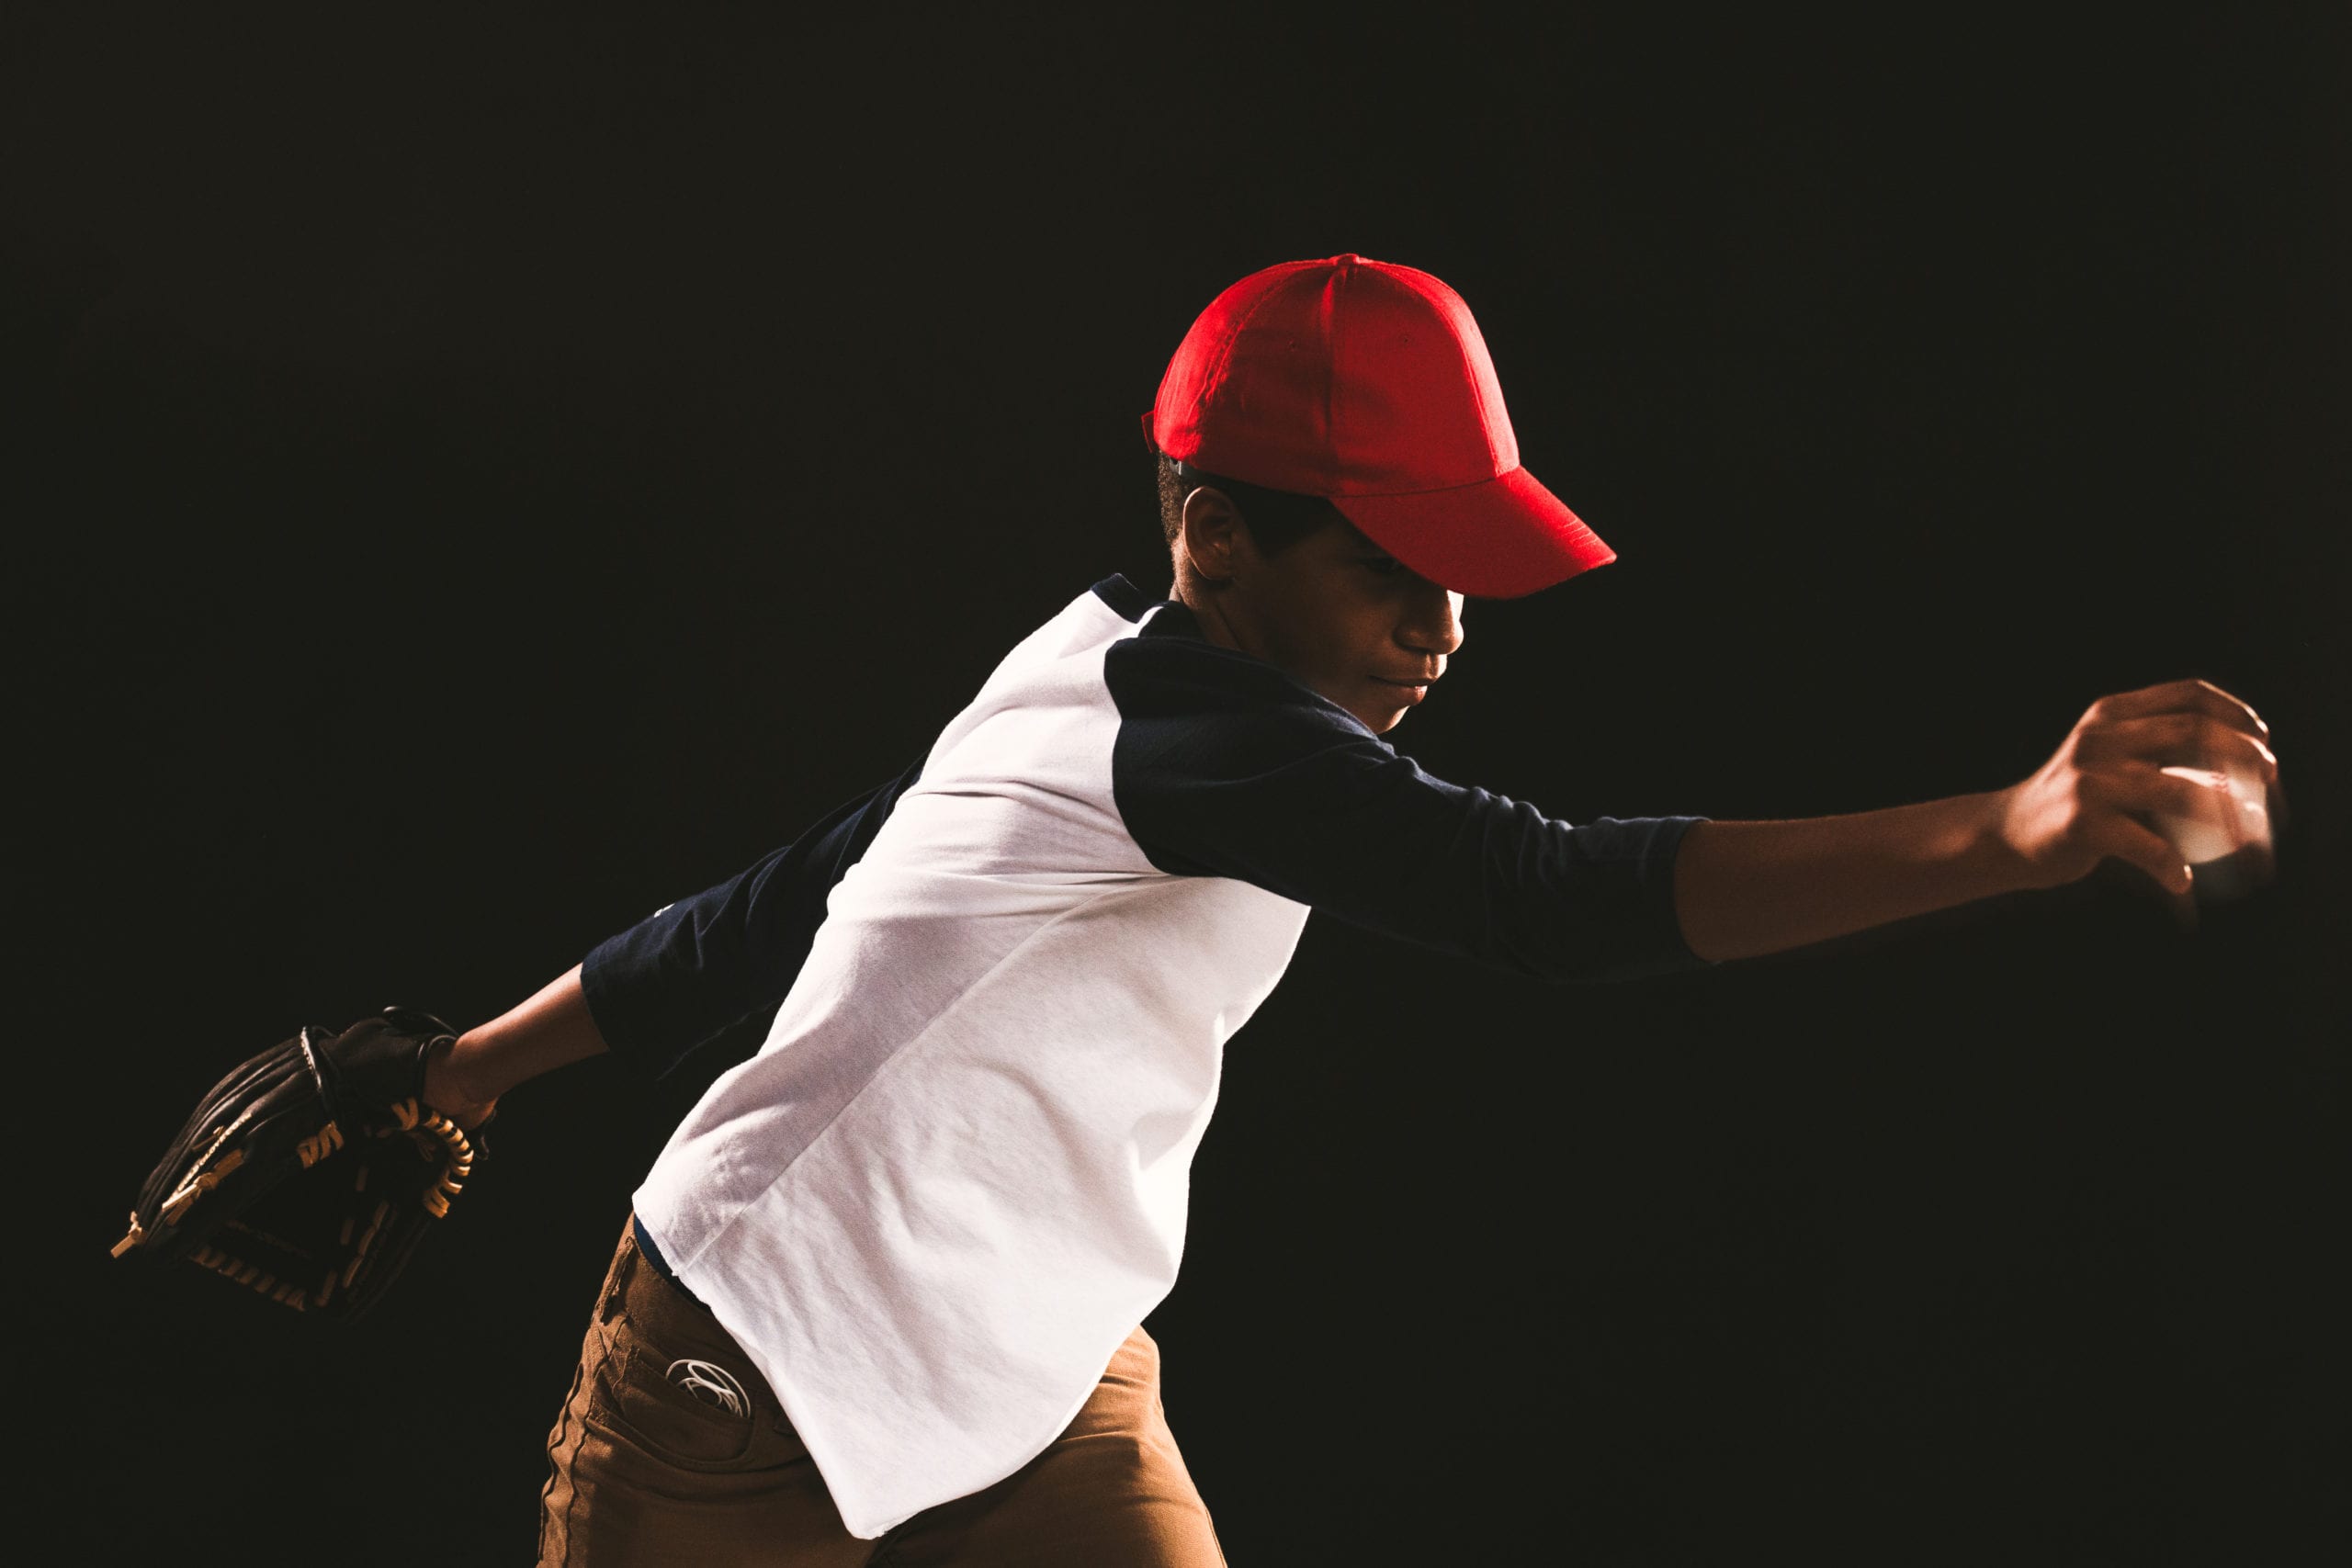 IU C&I Studios Ball Cap Liner Side profile of a young baseball player wearing a red cap in a pitching pose